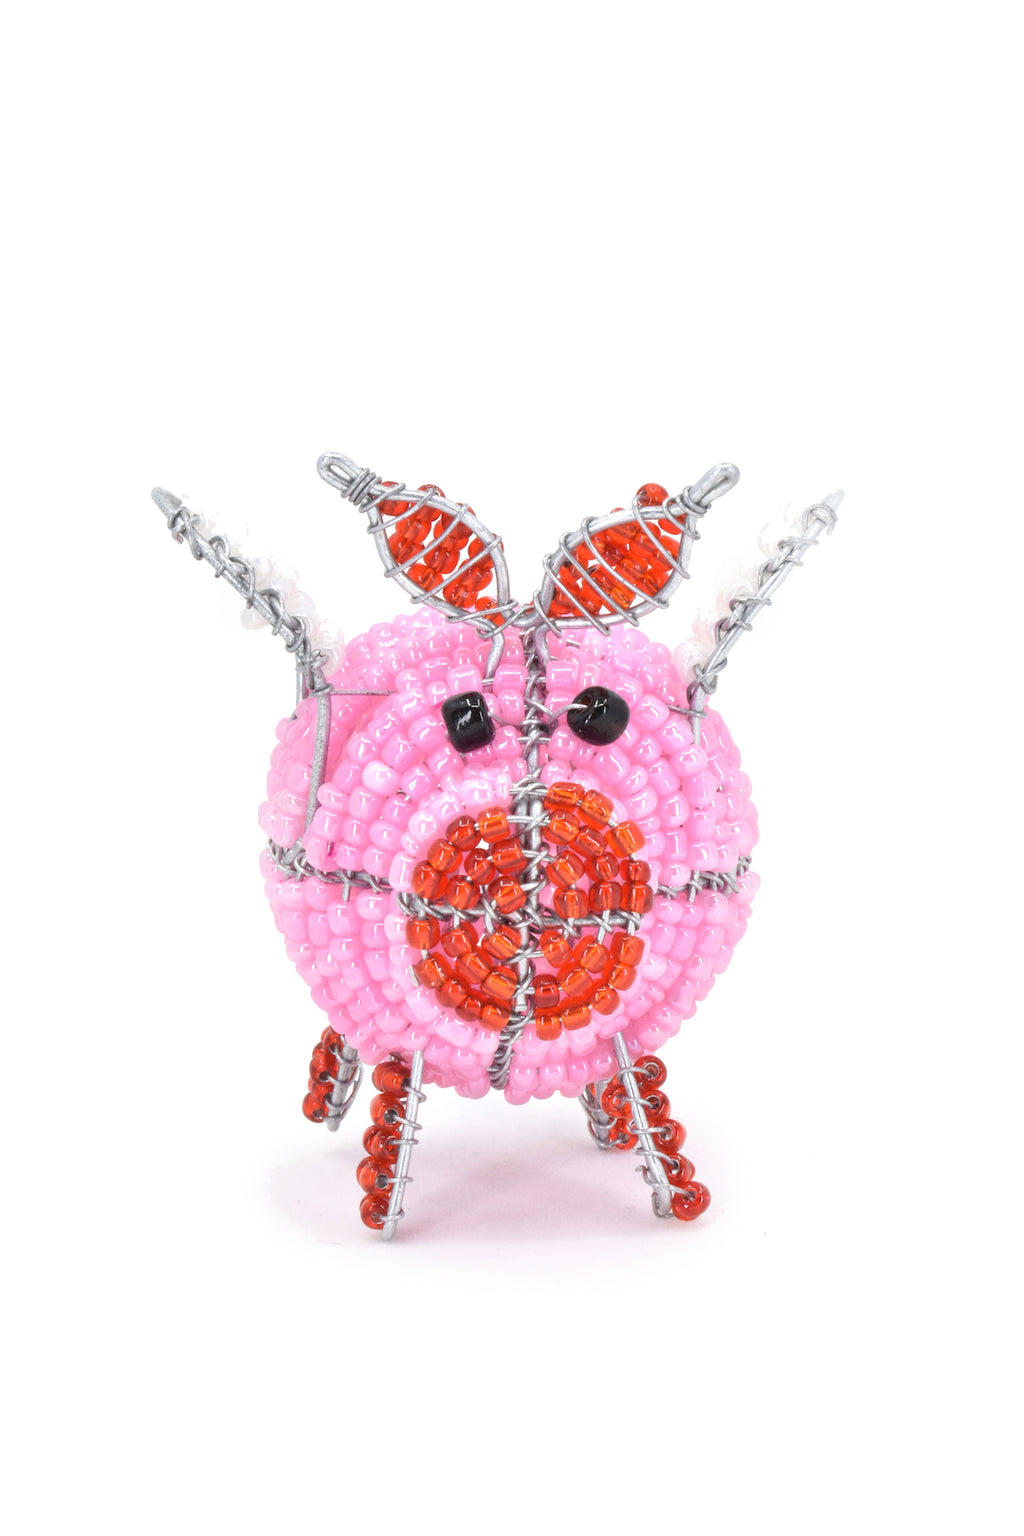 Patmore's <i>When Pigs Fly</i> Beadwork Sculpture